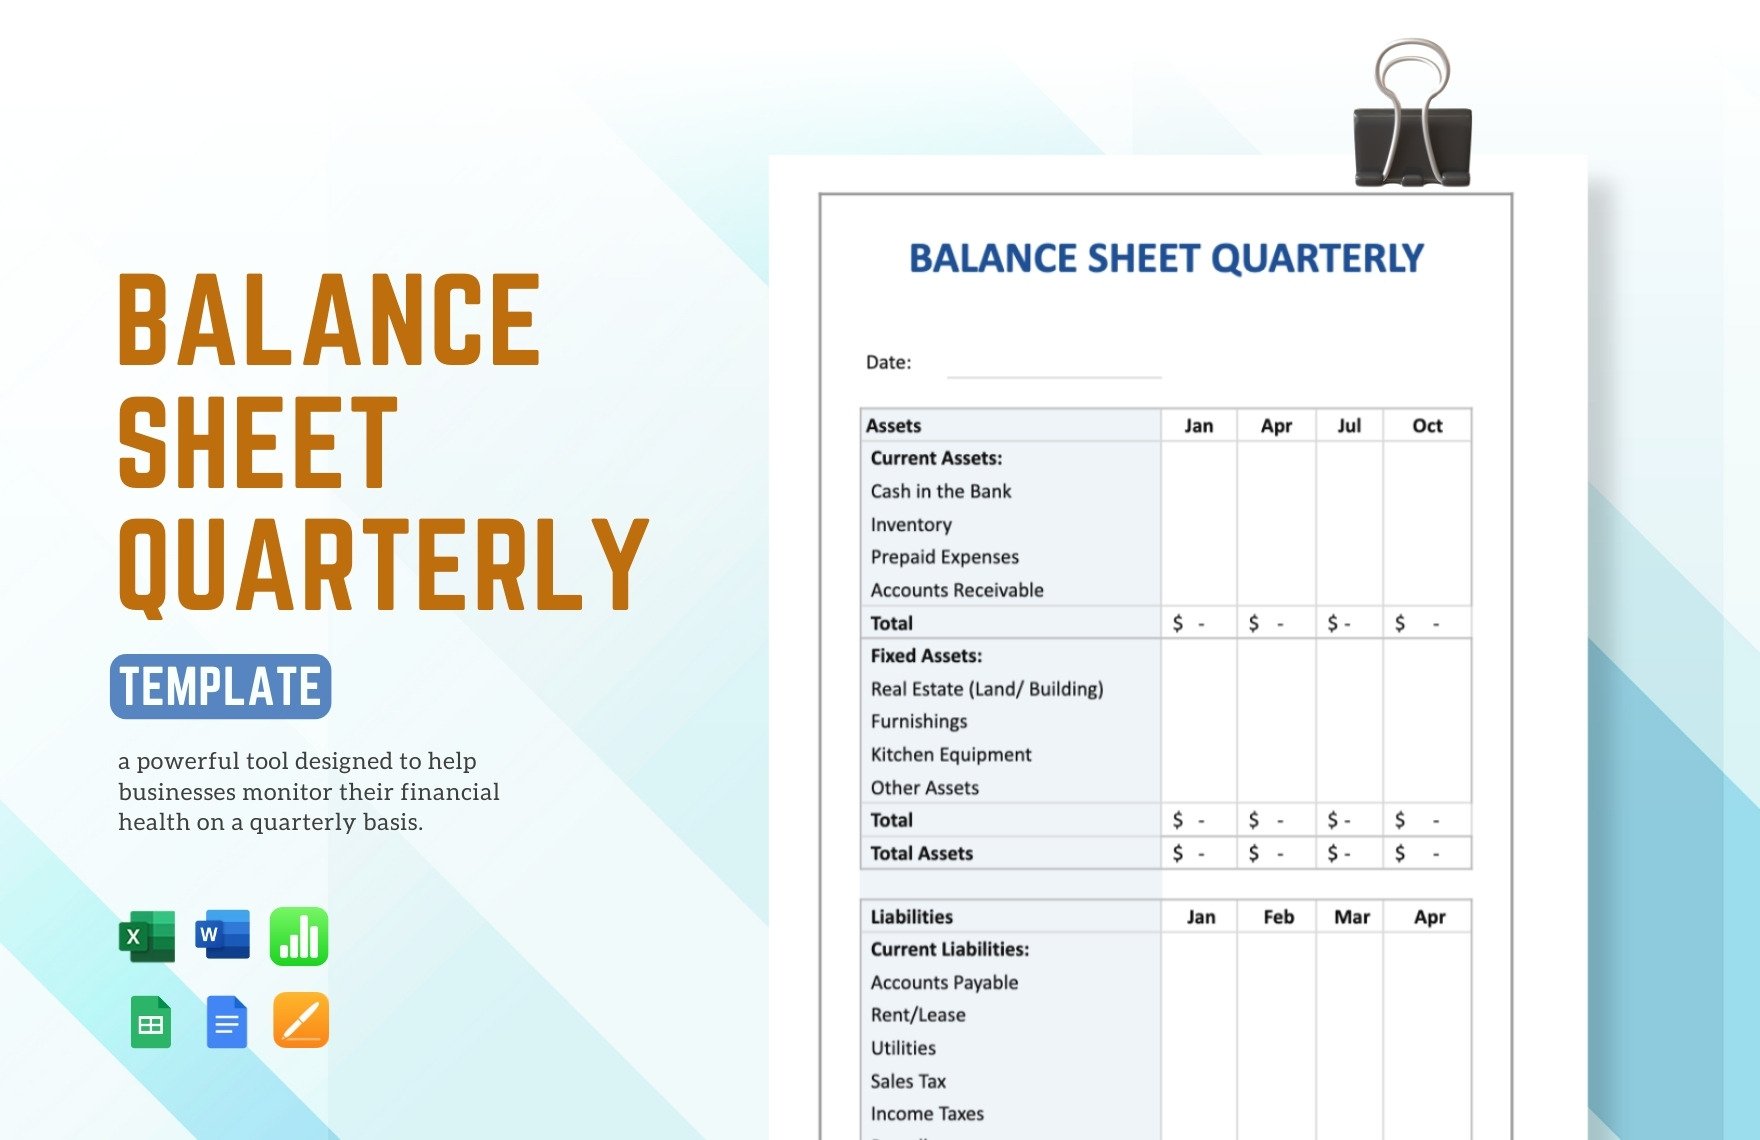 Balance Sheet Quarterly Template in Apple Numbers Word Apple Pages